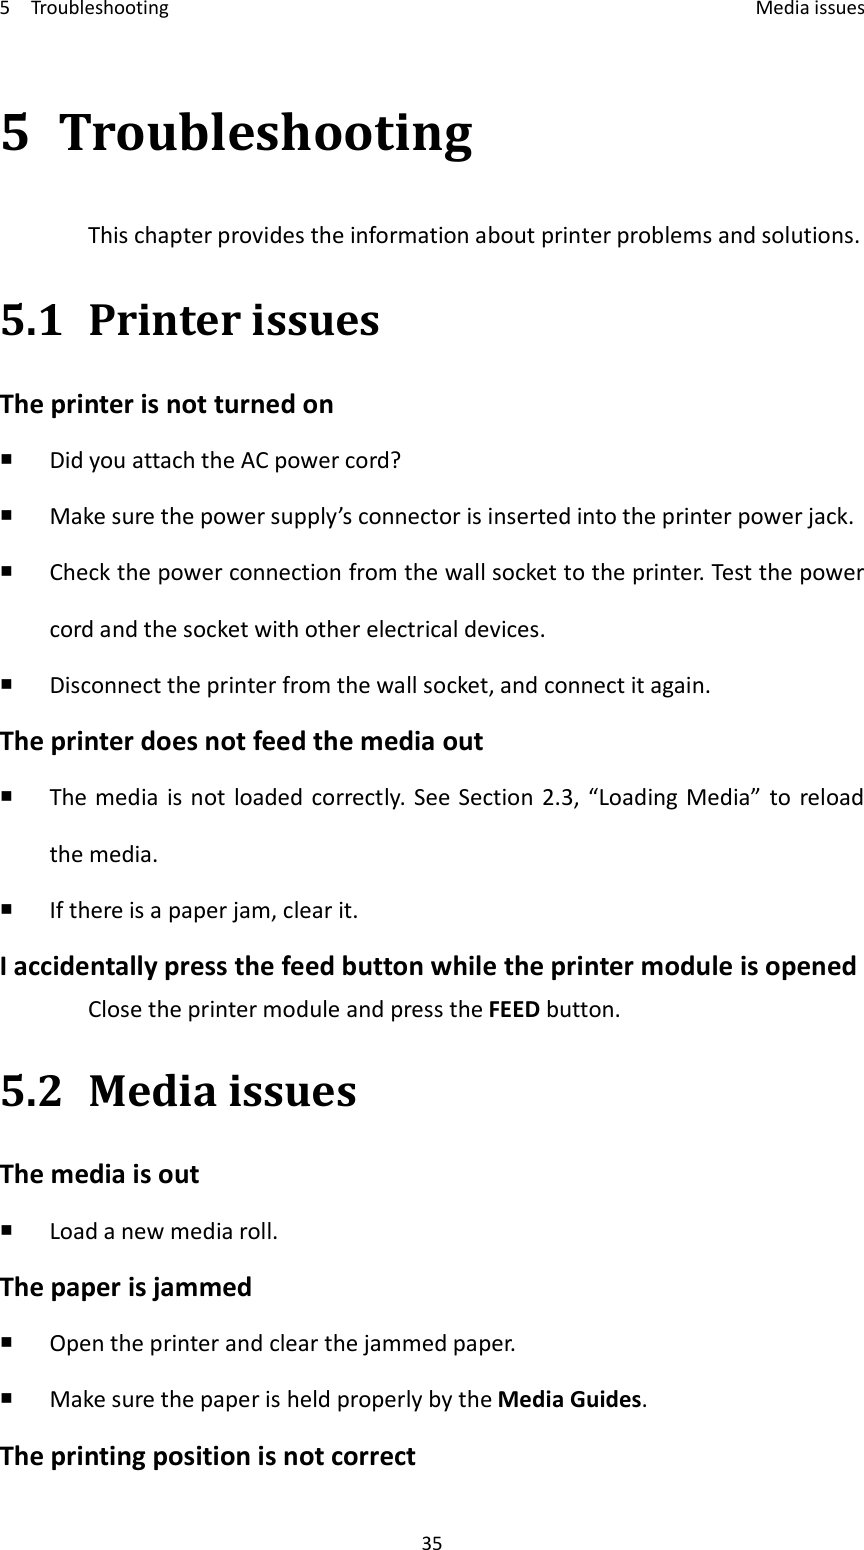 5    Troubleshooting    Media issues 35 5 Troubleshooting This chapter provides the information about printer problems and solutions. 5.1 Printer issues The printer is not turned on  Did you attach the AC power cord?  Make sure the power supply’s connector is inserted into the printer power jack.  Check the power connection from the wall socket to the printer. Test the power cord and the socket with other electrical devices.  Disconnect the printer from the wall socket, and connect it again. The printer does not feed the media out  The media  is not  loaded correctly. See Section 2.3, “Loading Media” to  reload the media.  If there is a paper jam, clear it. I accidentally press the feed button while the printer module is opened Close the printer module and press the FEED button. 5.2 Media issues The media is out  Load a new media roll. The paper is jammed  Open the printer and clear the jammed paper.  Make sure the paper is held properly by the Media Guides. The printing position is not correct 